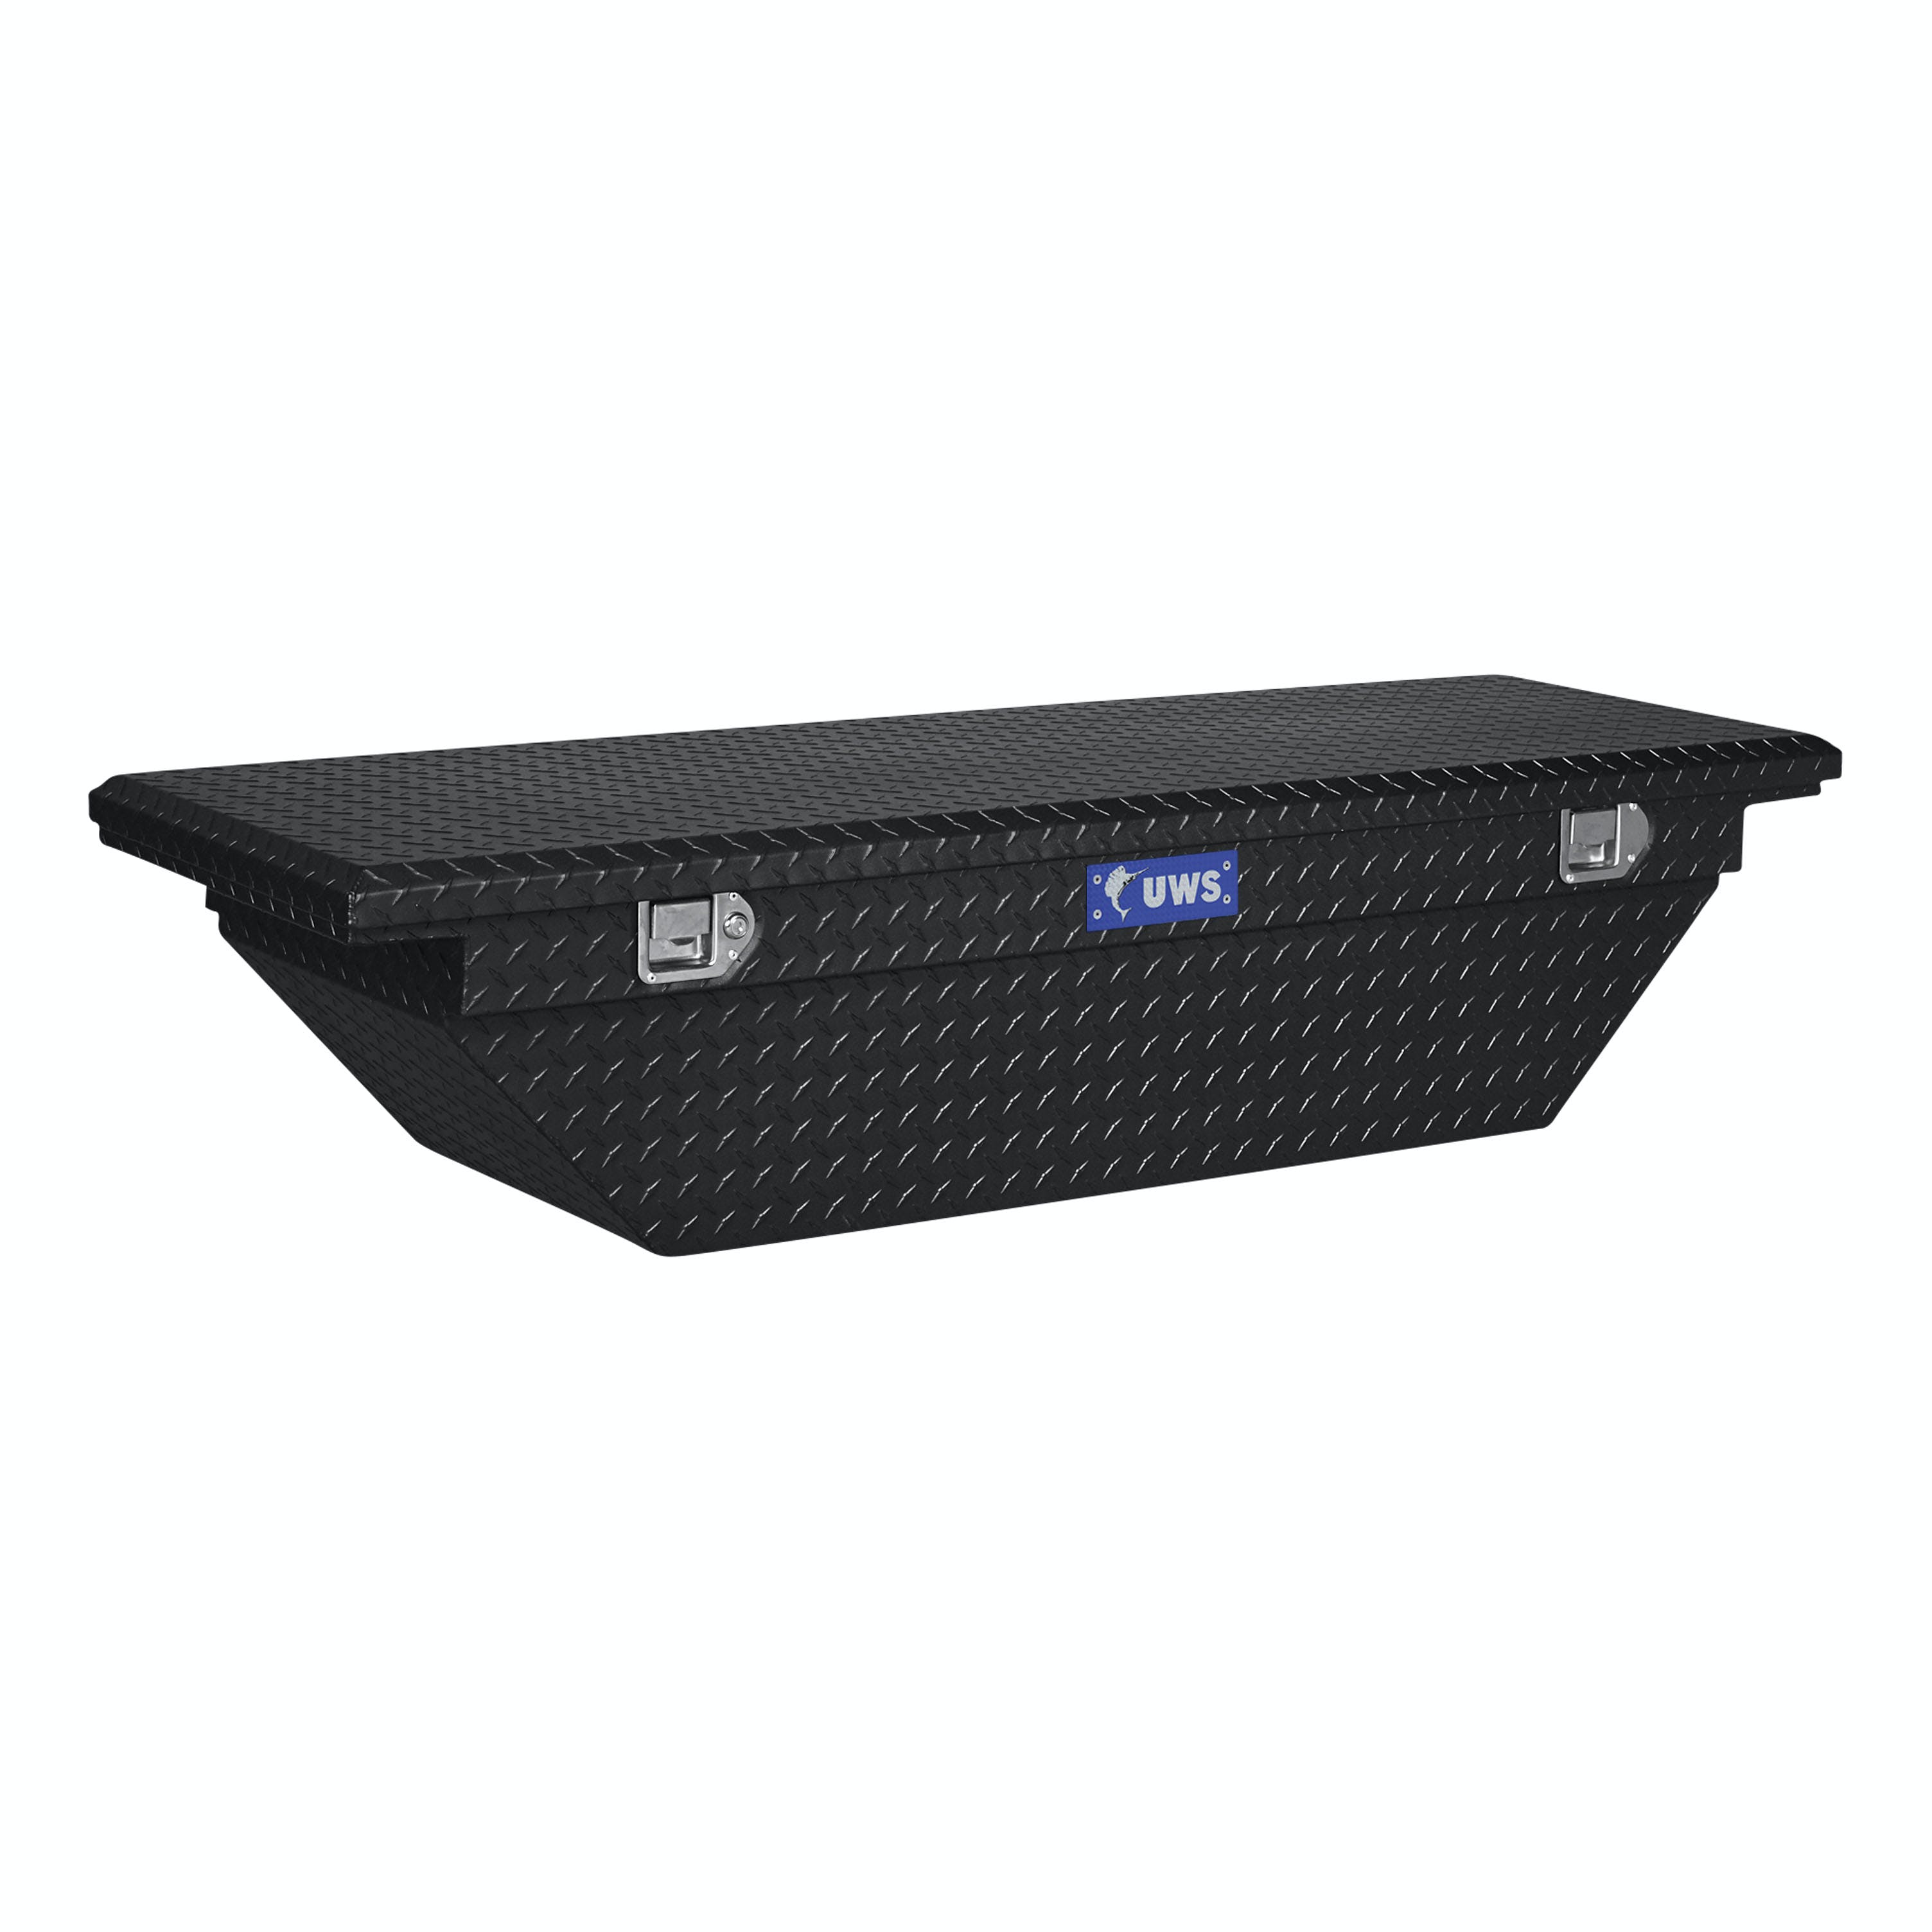 UWS TBS-63-A-LP-BLK 63 inch Aluminum Single Lid Crossover Toolbox Low Profile Angled Black